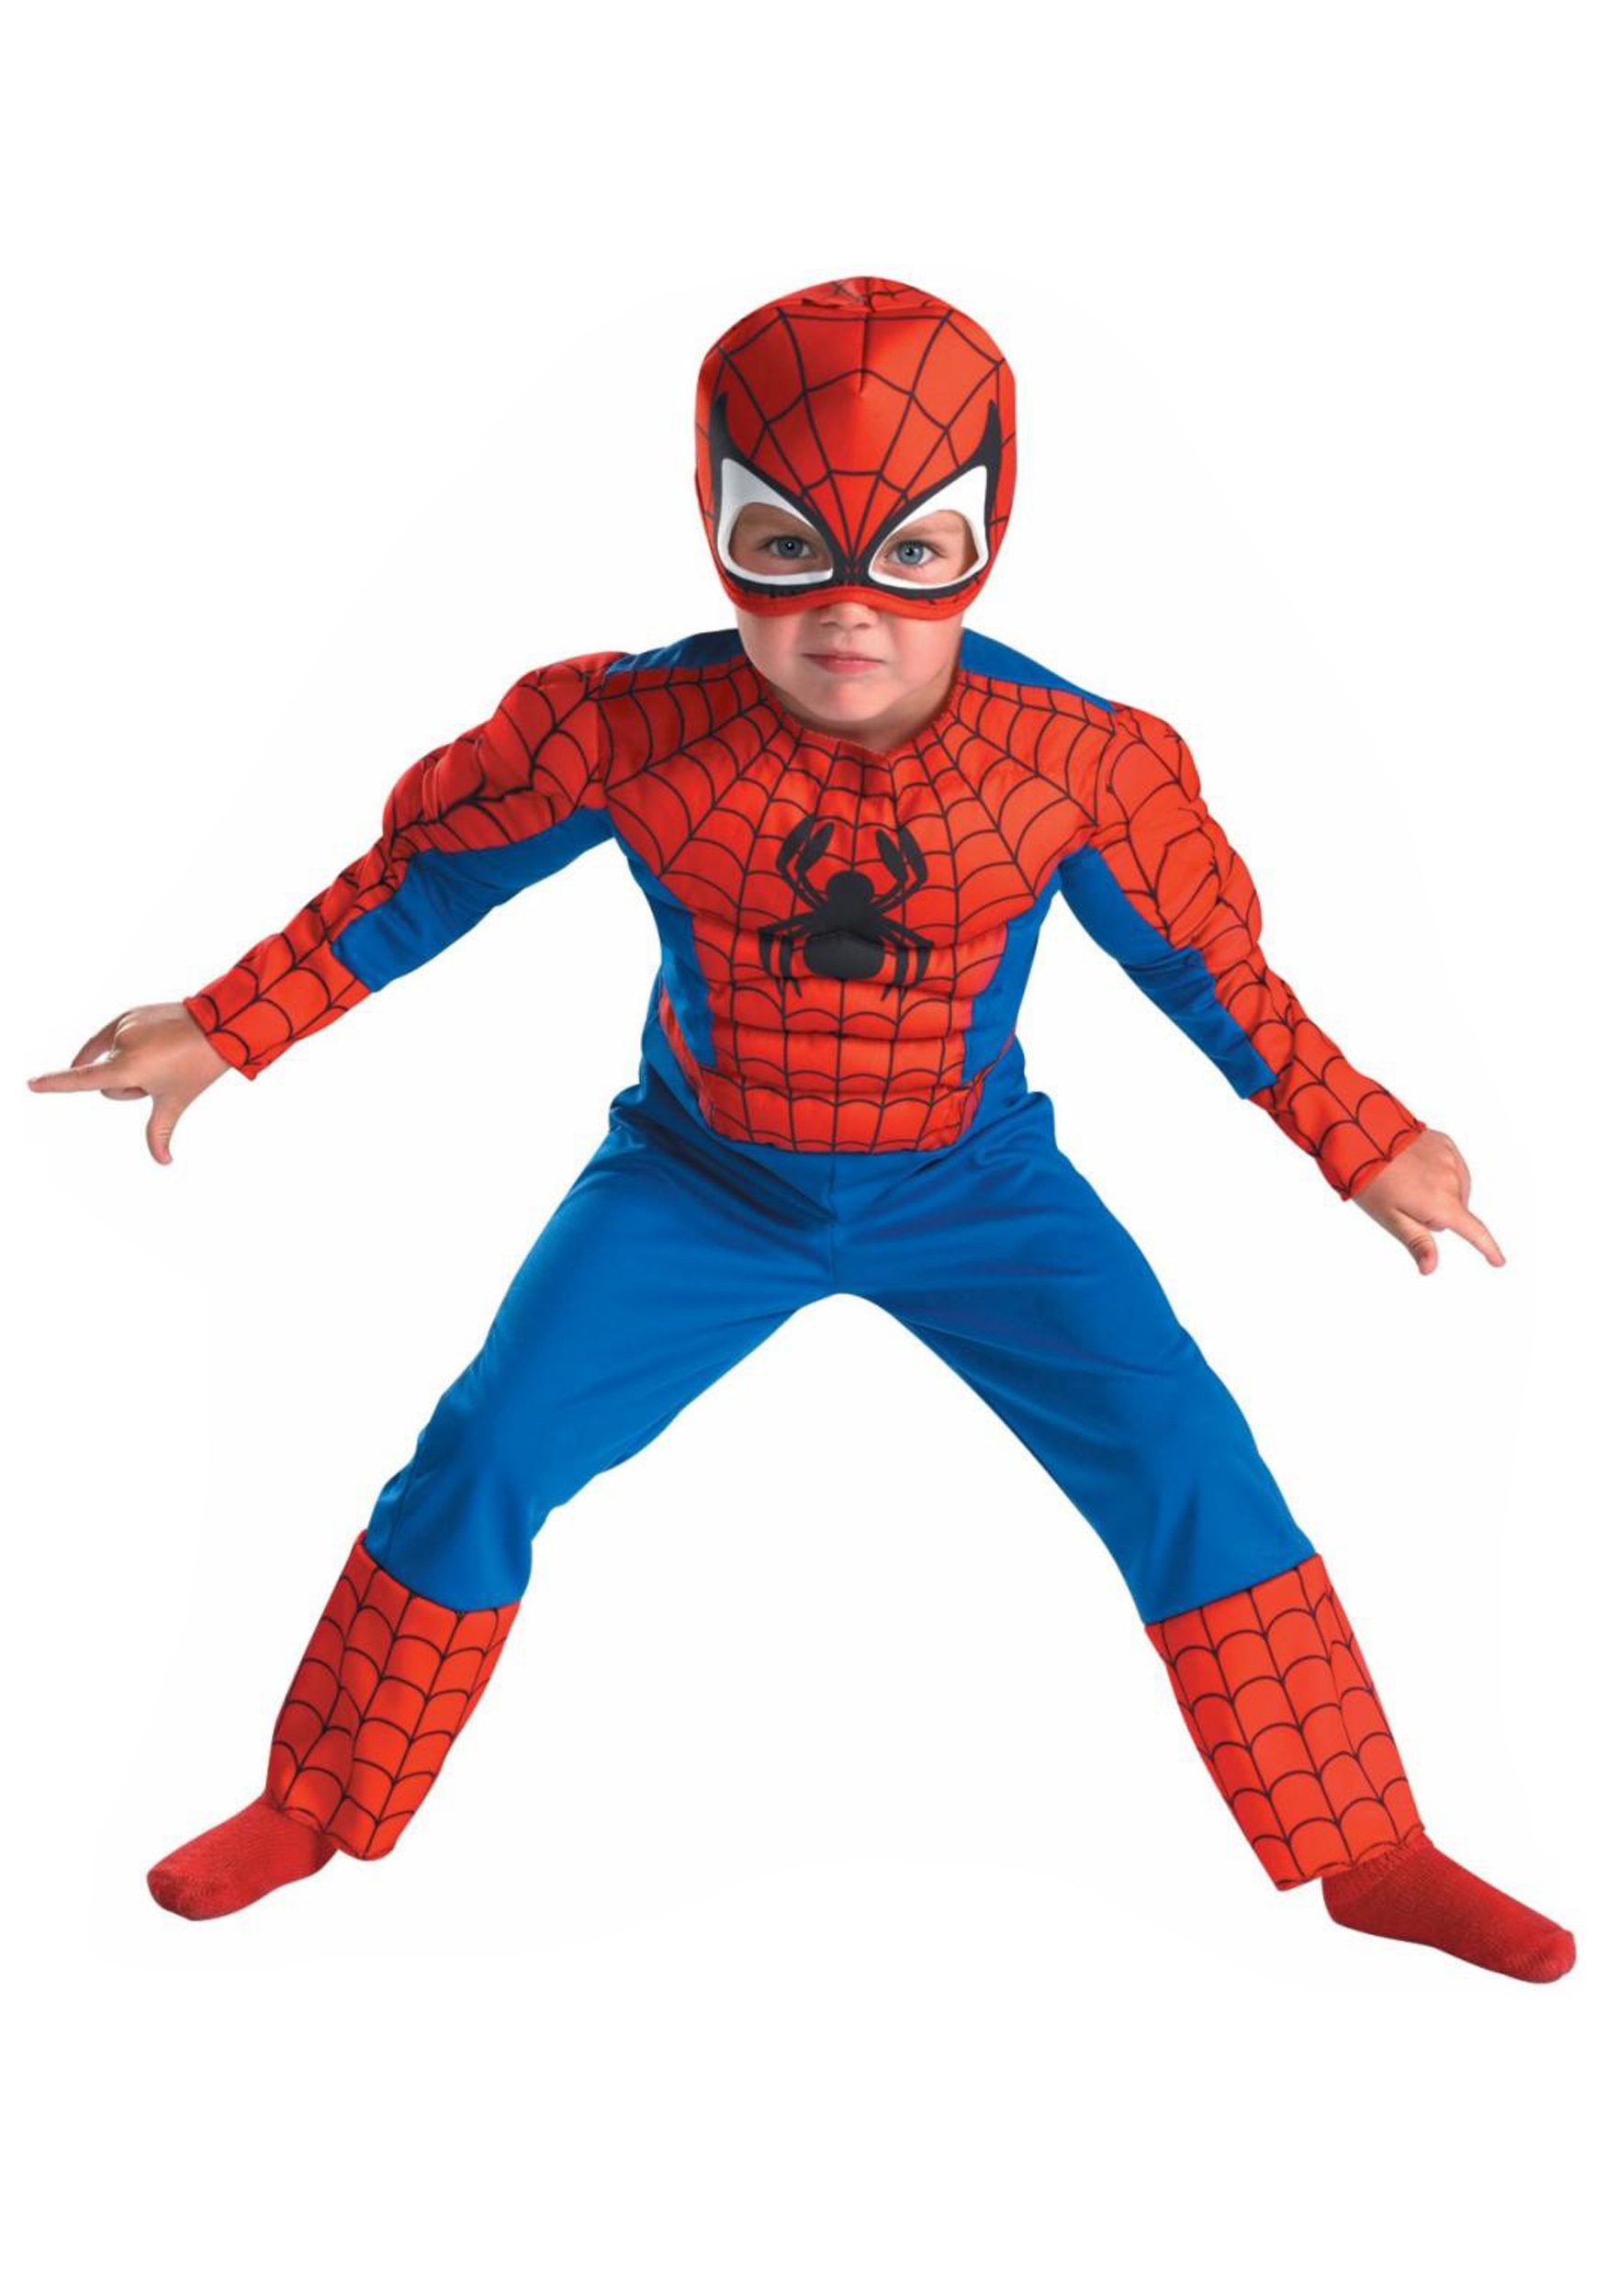 Free Spiderman Mask, Download Free Spiderman Mask png images, Free ...